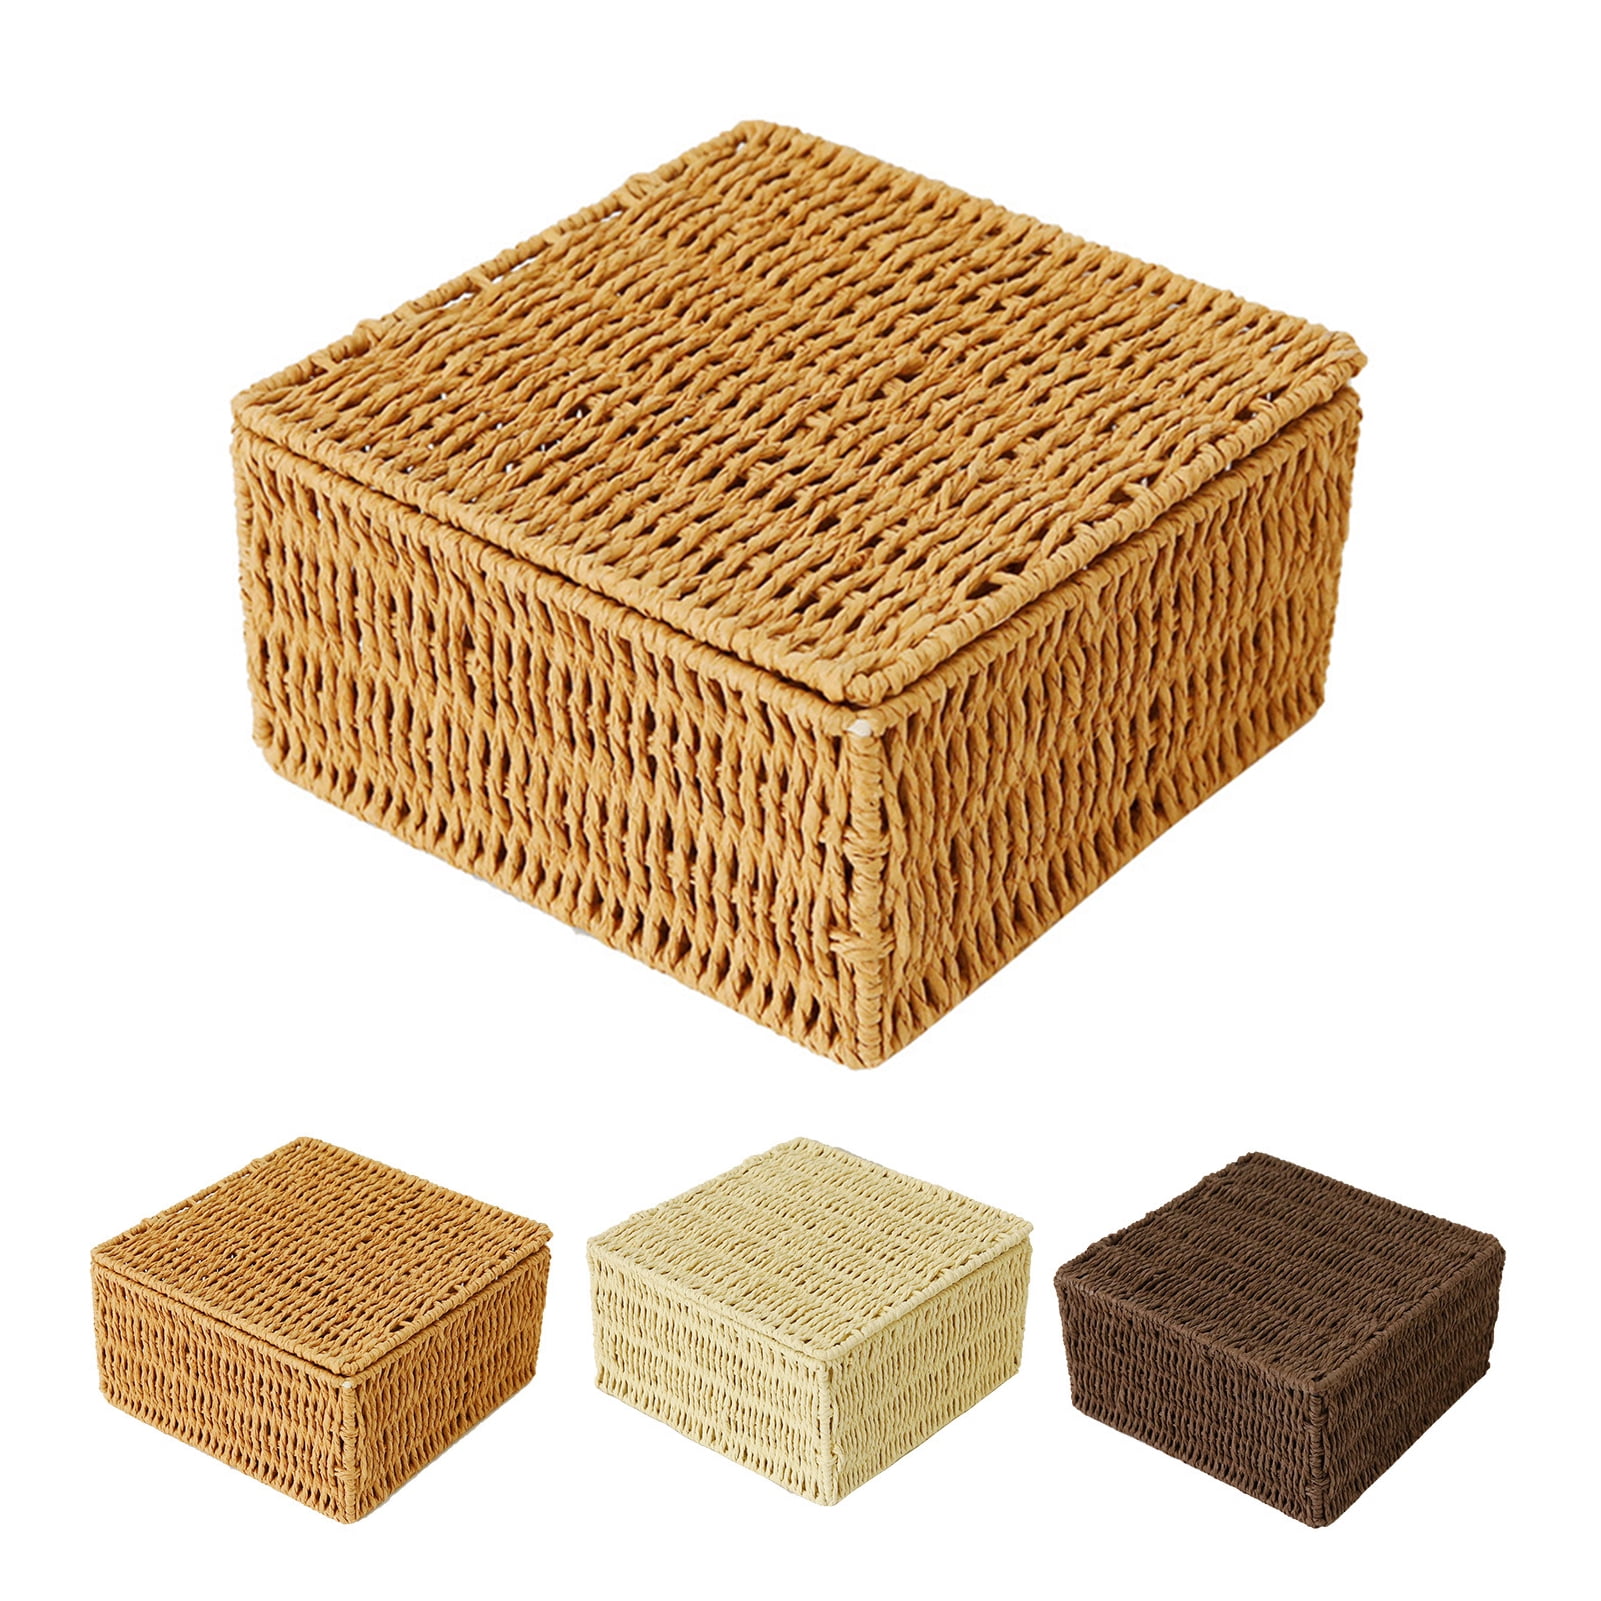 Large Square Storage Basket Handmade Woven Seagrass Straw Box Rattan With Lids